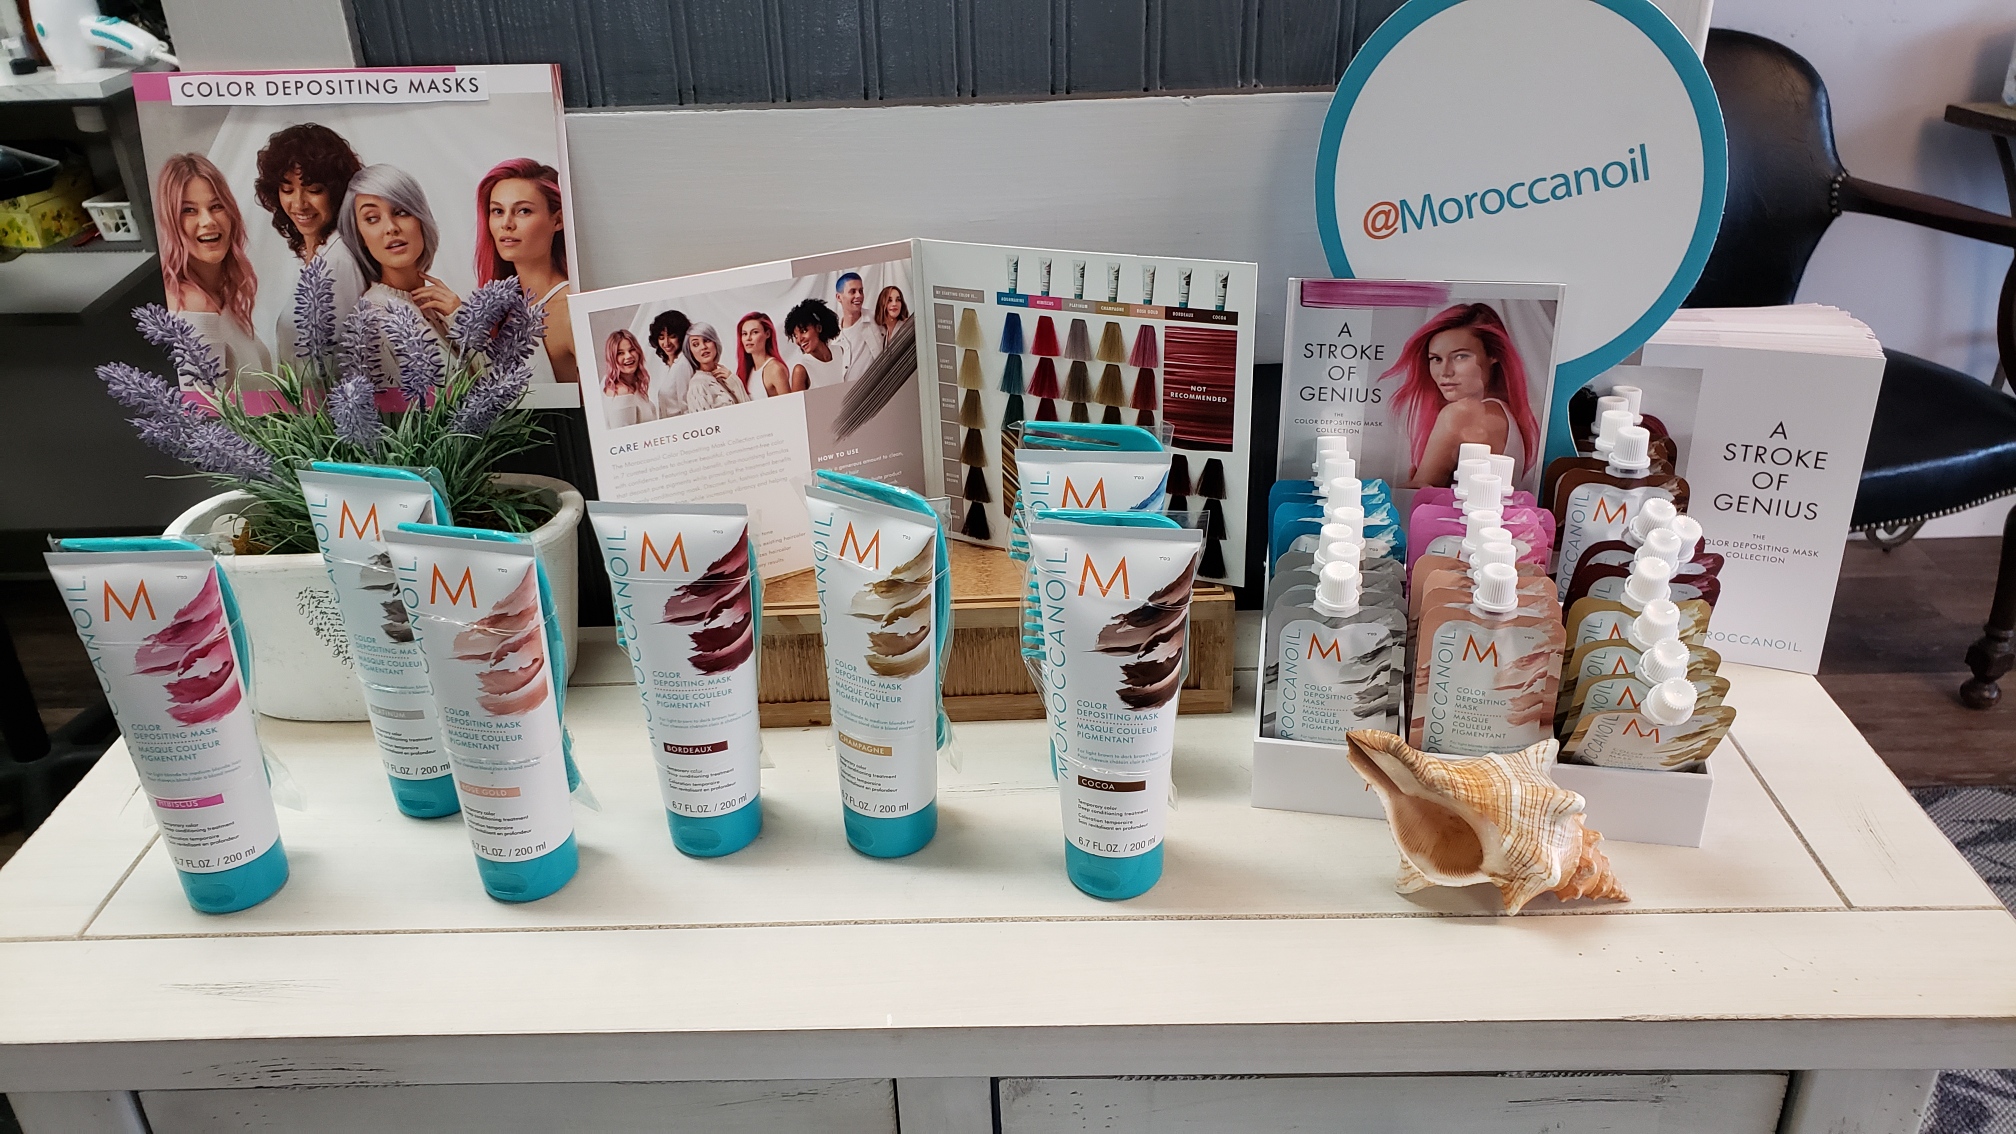 New at Hair Today: Color Depositing Masks by Moroccanoil - Hair Today CT